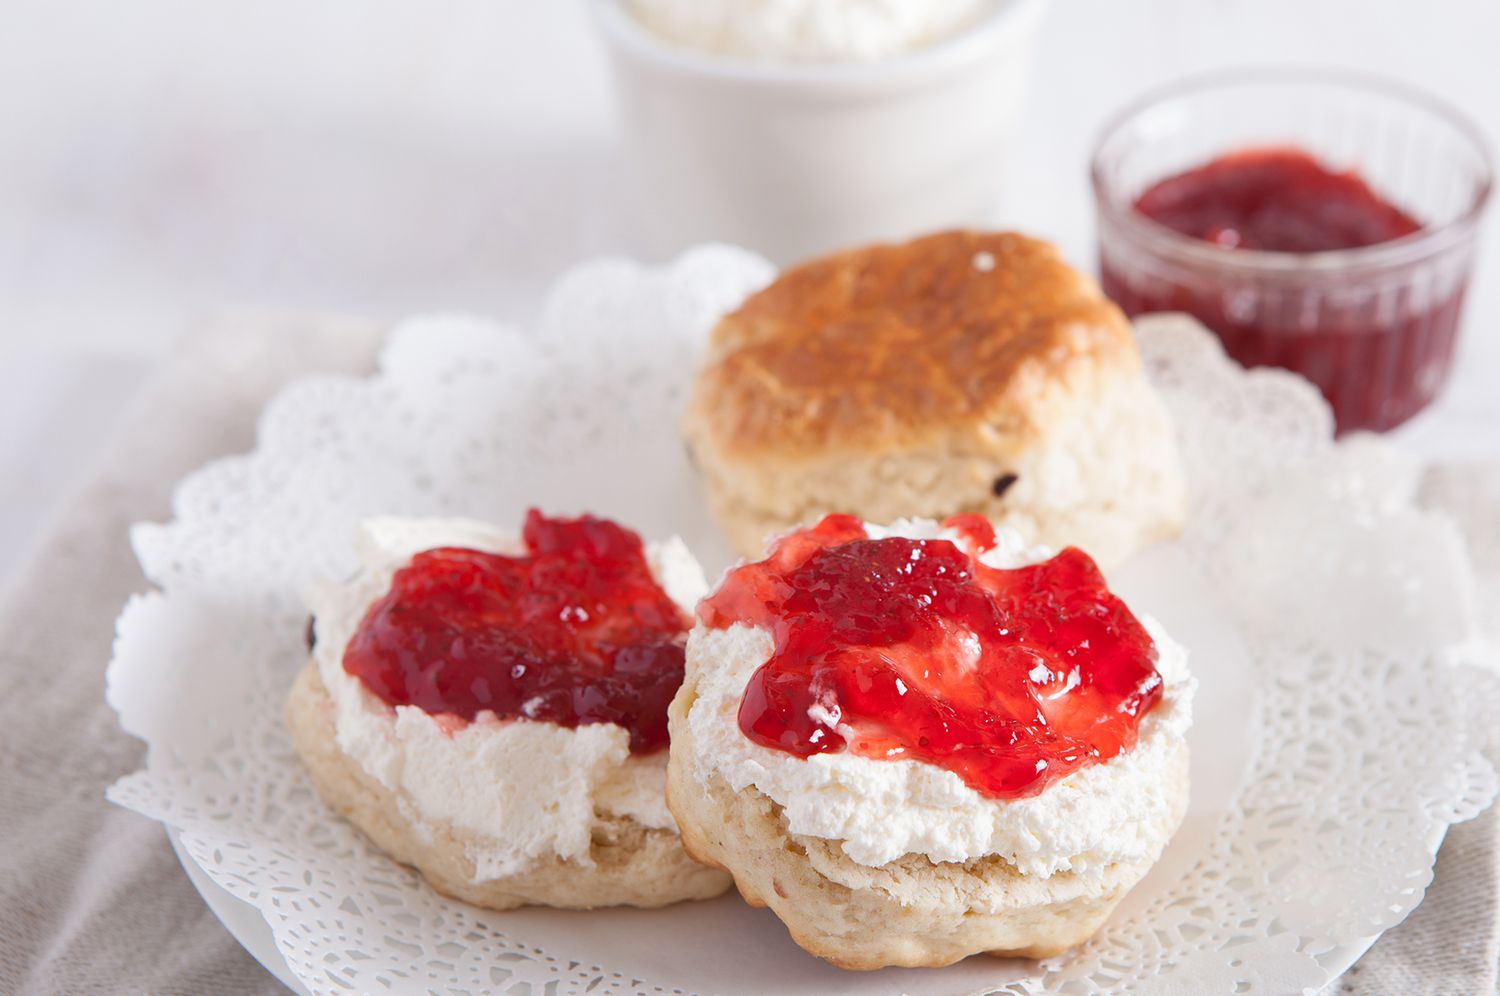 scones with jam and clotted cream